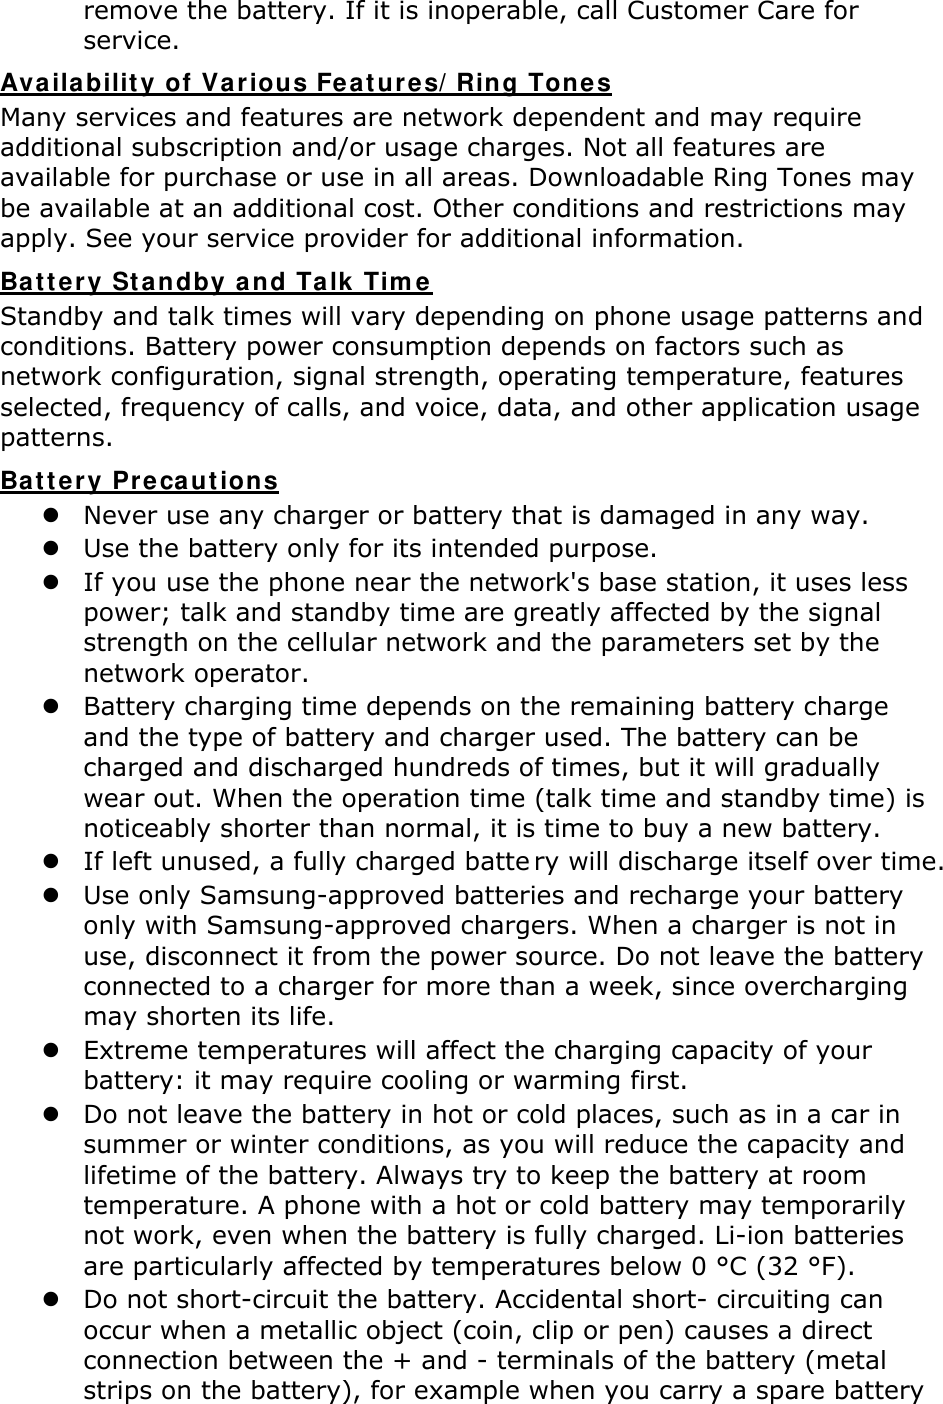 remove the battery. If it is inoperable, call Customer Care for service. Availabilit y of Various Fe at ures/ Ring Tone s Many services and features are network dependent and may require additional subscription and/or usage charges. Not all features are available for purchase or use in all areas. Downloadable Ring Tones may be available at an additional cost. Other conditions and restrictions may apply. See your service provider for additional information. Ba t tery St a ndby a nd Talk Tim e Standby and talk times will vary depending on phone usage patterns and conditions. Battery power consumption depends on factors such as network configuration, signal strength, operating temperature, features selected, frequency of calls, and voice, data, and other application usage patterns.   Ba t tery Preca ut ions z Never use any charger or battery that is damaged in any way. z Use the battery only for its intended purpose. z If you use the phone near the network&apos;s base station, it uses less power; talk and standby time are greatly affected by the signal strength on the cellular network and the parameters set by the network operator. z Battery charging time depends on the remaining battery charge and the type of battery and charger used. The battery can be charged and discharged hundreds of times, but it will gradually wear out. When the operation time (talk time and standby time) is noticeably shorter than normal, it is time to buy a new battery. z If left unused, a fully charged batte ry will discharge itself over time.  z Use only Samsung-approved batteries and recharge your battery only with Samsung-approved chargers. When a charger is not in use, disconnect it from the power source. Do not leave the battery connected to a charger for more than a week, since overcharging may shorten its life. z Extreme temperatures will affect the charging capacity of your battery: it may require cooling or warming first. z Do not leave the battery in hot or cold places, such as in a car in summer or winter conditions, as you will reduce the capacity and lifetime of the battery. Always try to keep the battery at room temperature. A phone with a hot or cold battery may temporarily not work, even when the battery is fully charged. Li-ion batteries are particularly affected by temperatures below 0 °C (32 °F). z Do not short-circuit the battery. Accidental short- circuiting can occur when a metallic object (coin, clip or pen) causes a direct connection between the + and - terminals of the battery (metal strips on the battery), for example when you carry a spare battery 